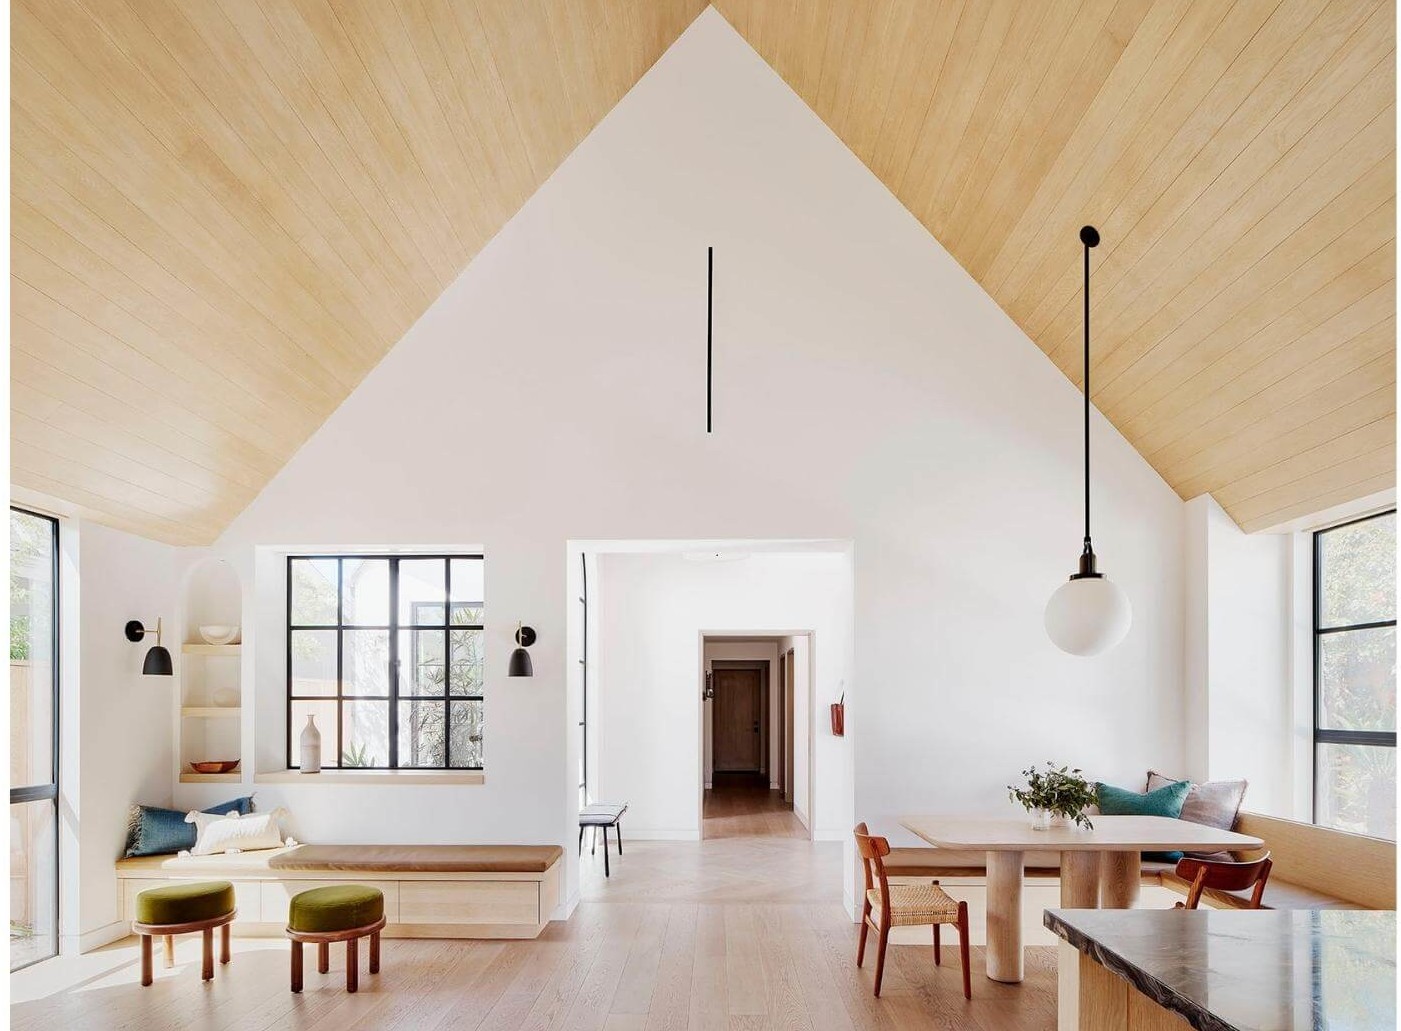 interior of a home with a pitched roof